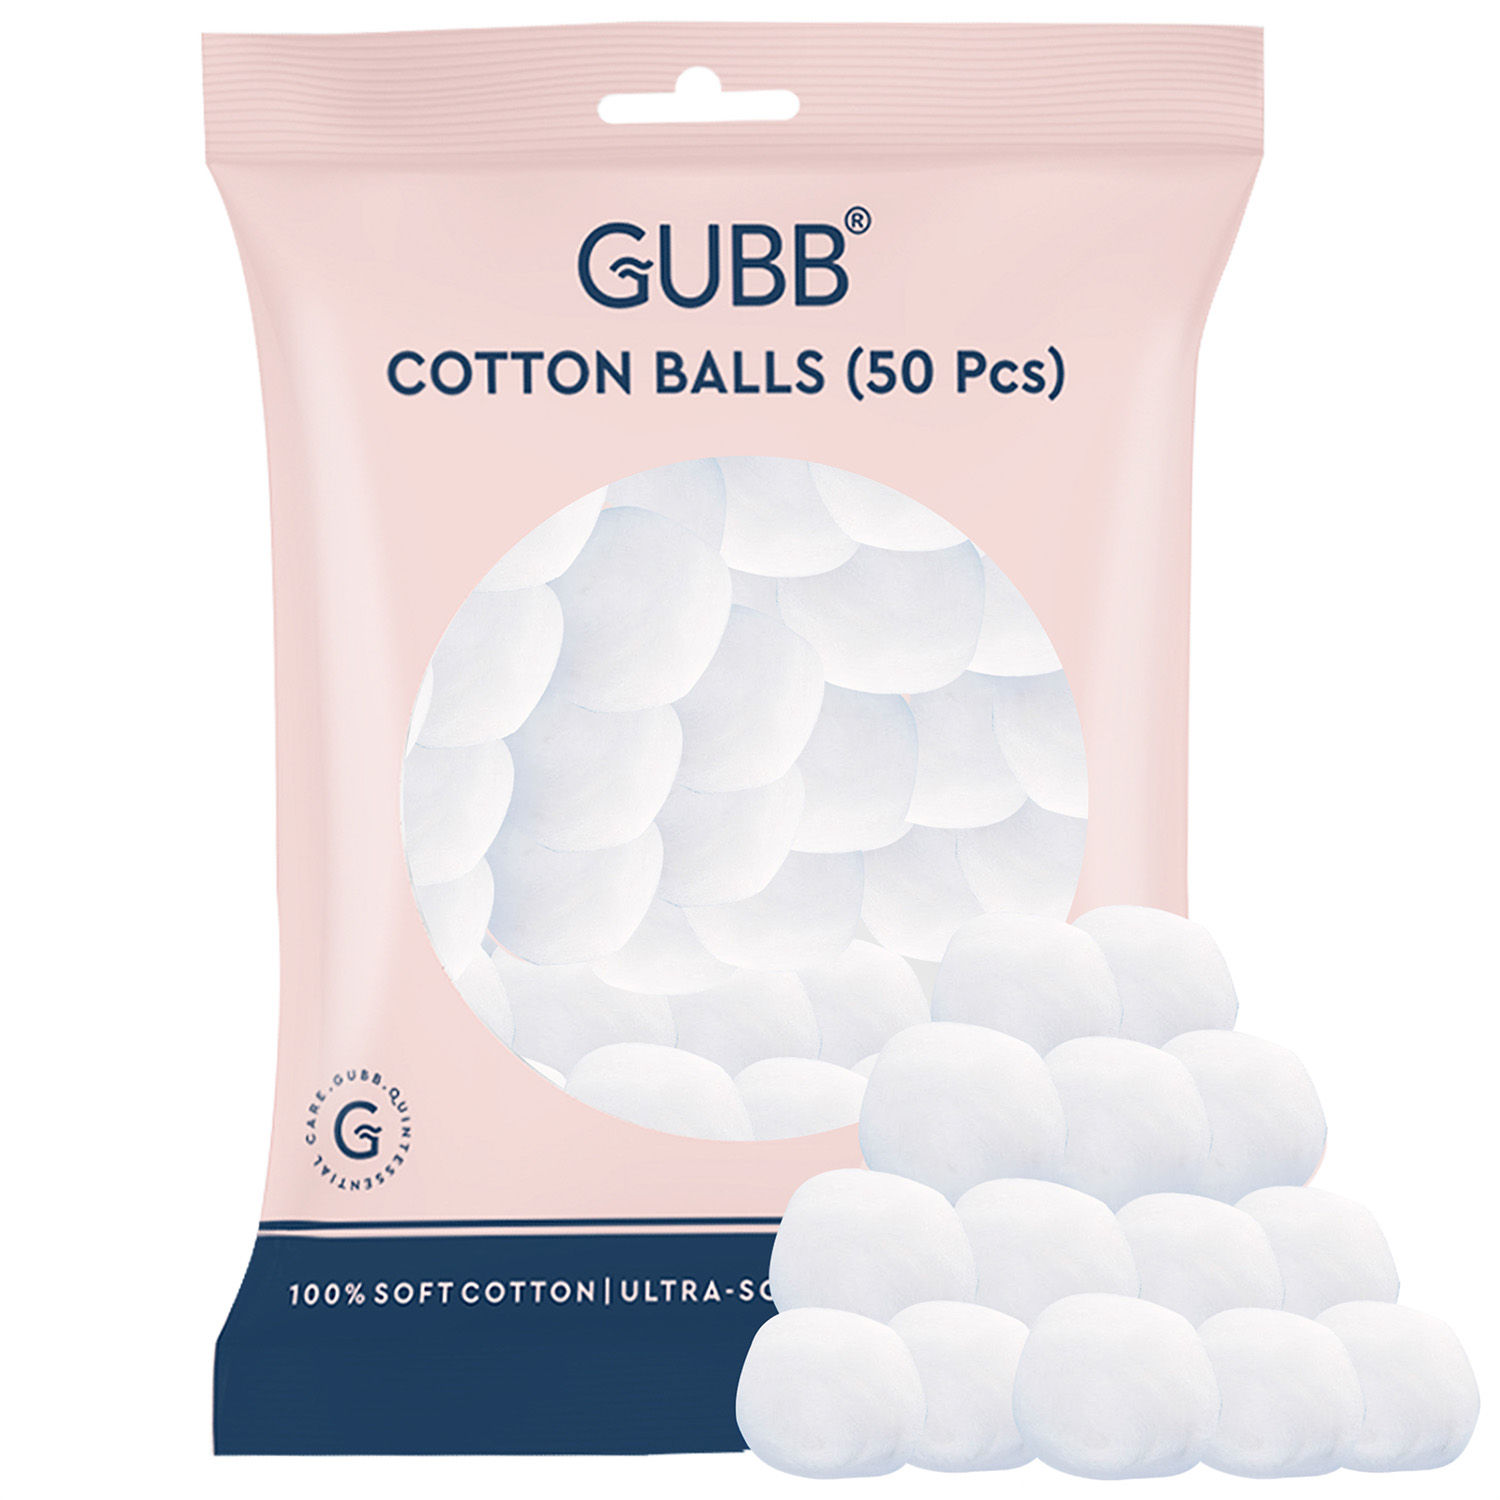 GUBB White Cotton Balls For Face Cleansing & Makeup Removal - 50 Pieces